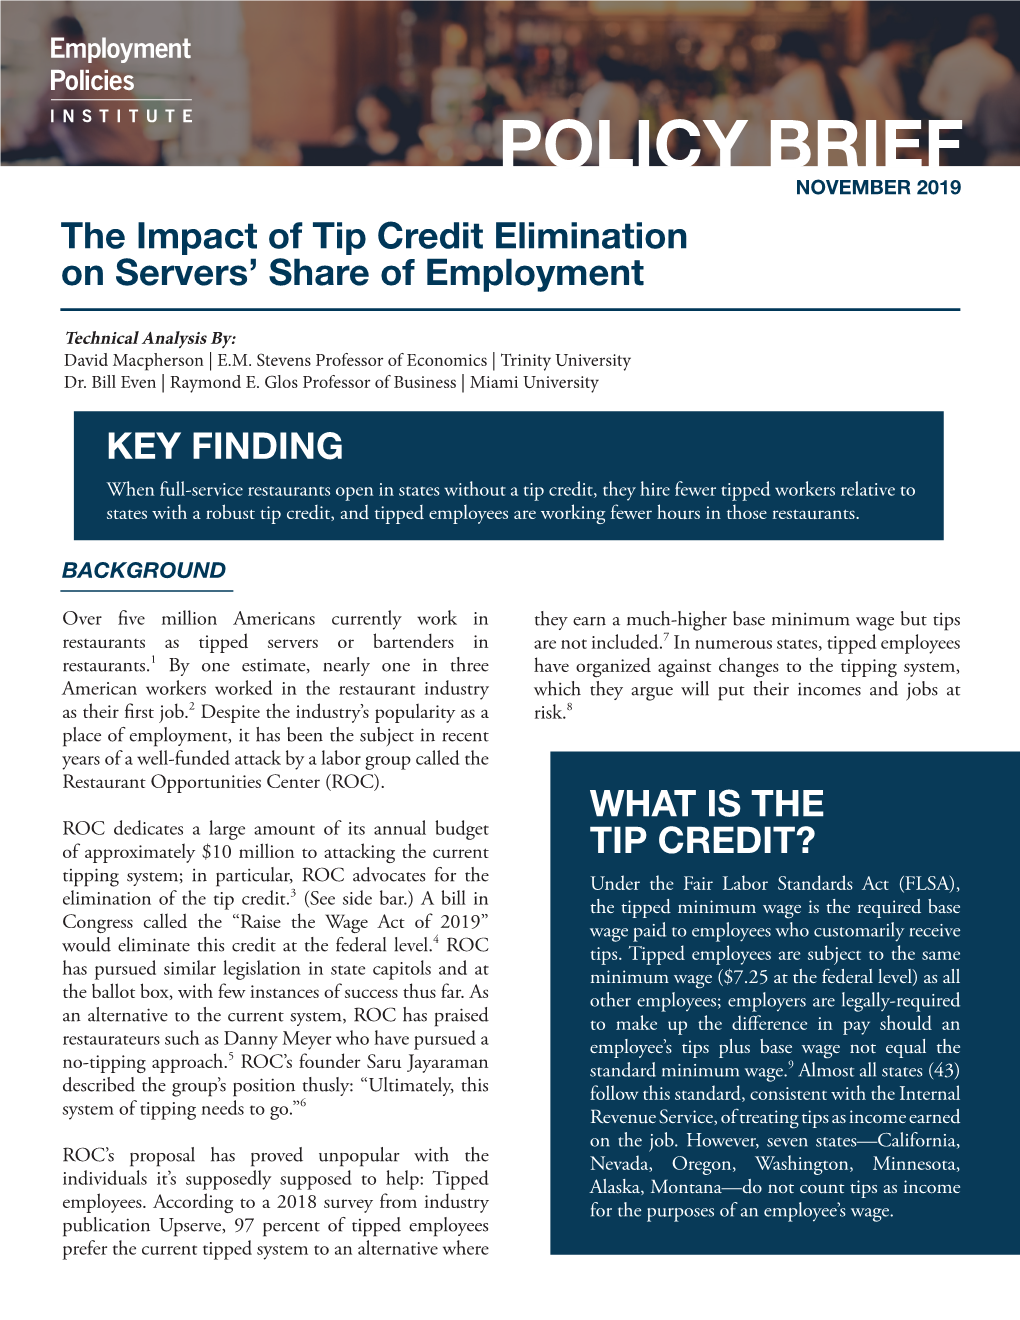 POLICY BRIEF NOVEMBER 2019 the Impact of Tip Credit Elimination on Servers’ Share of Employment